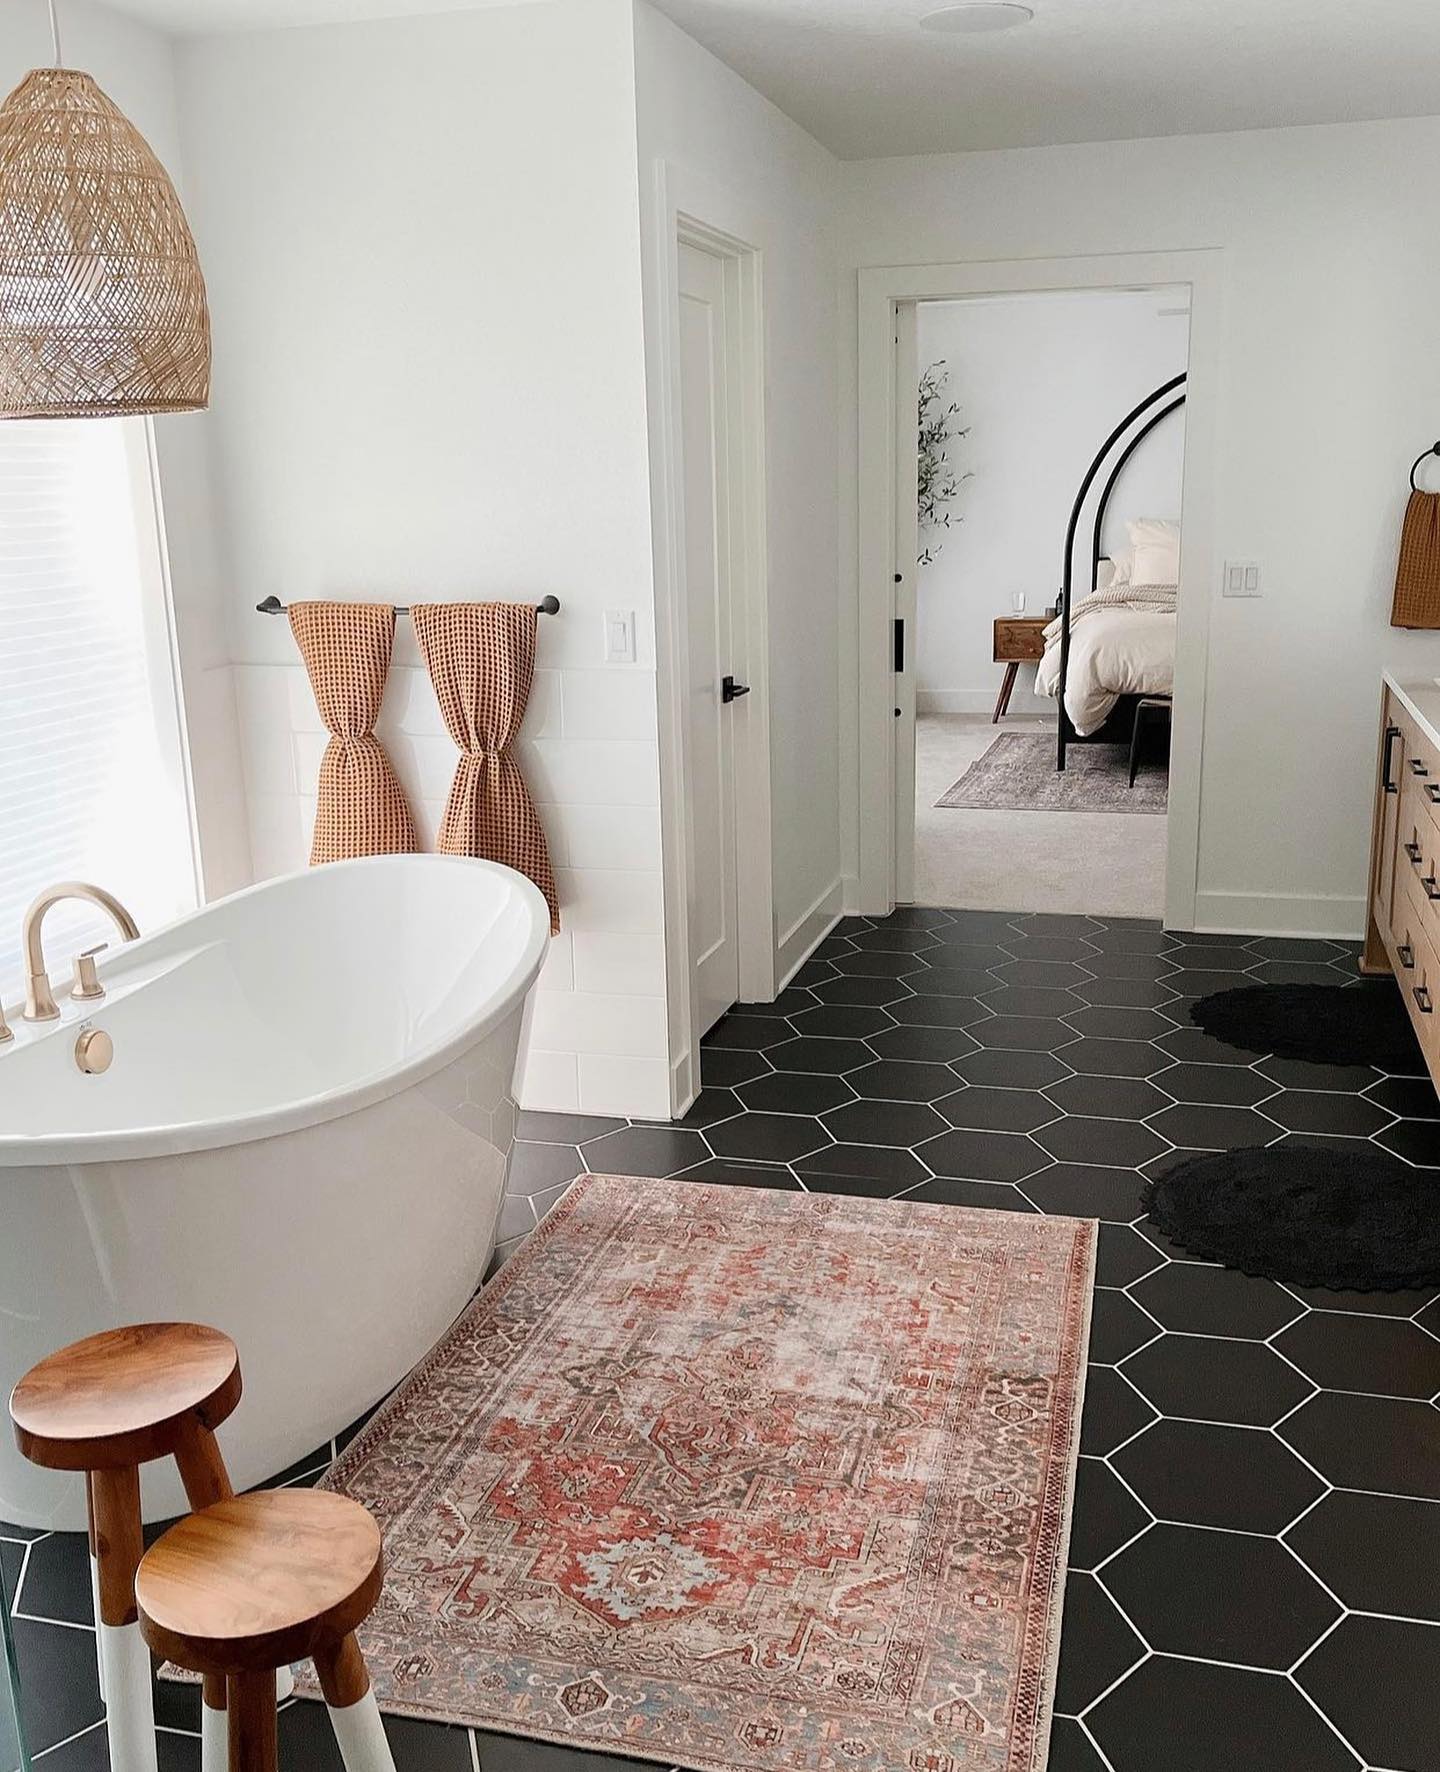 Monday Inspo via @firwood.farmhouse featuring our Rhythm series. 🖤 If you are looking for the perfect hexagon shaped tile, our Rhythm and Heksa collections are two of our favorites #emsertile